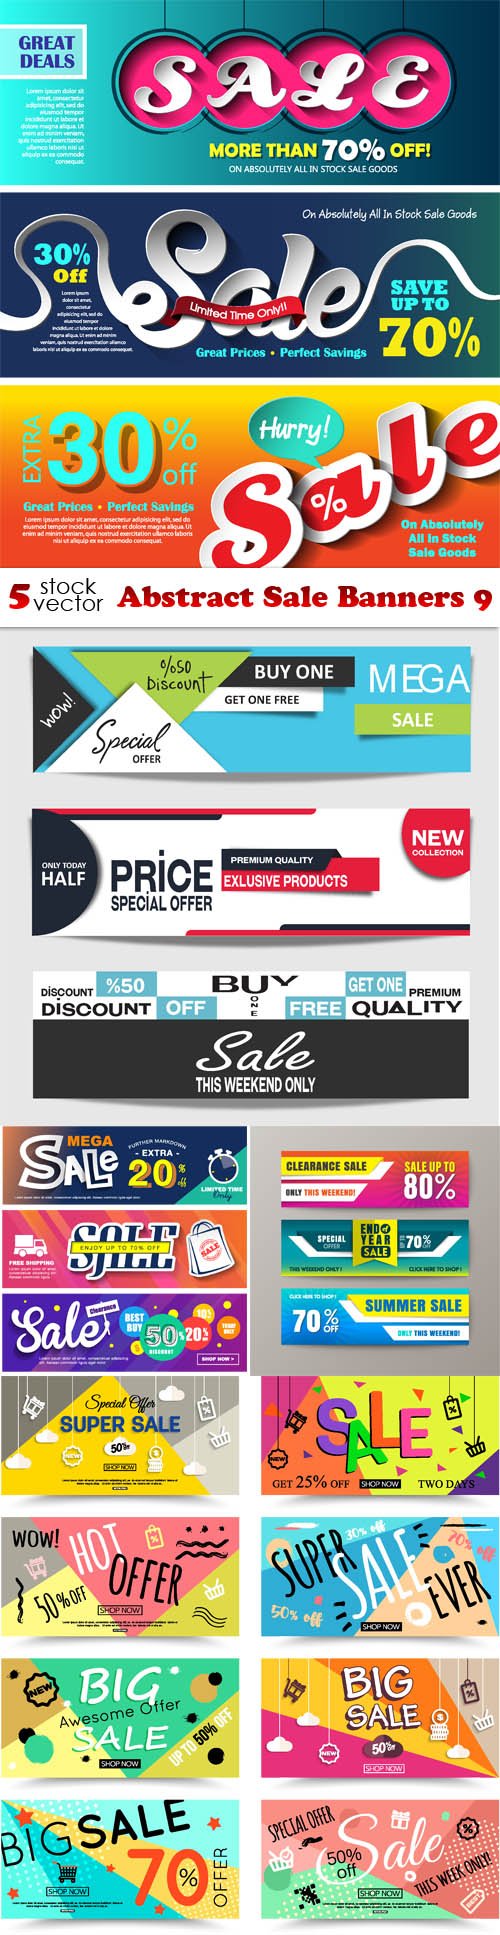 Vectors - Abstract Sale Banners 9